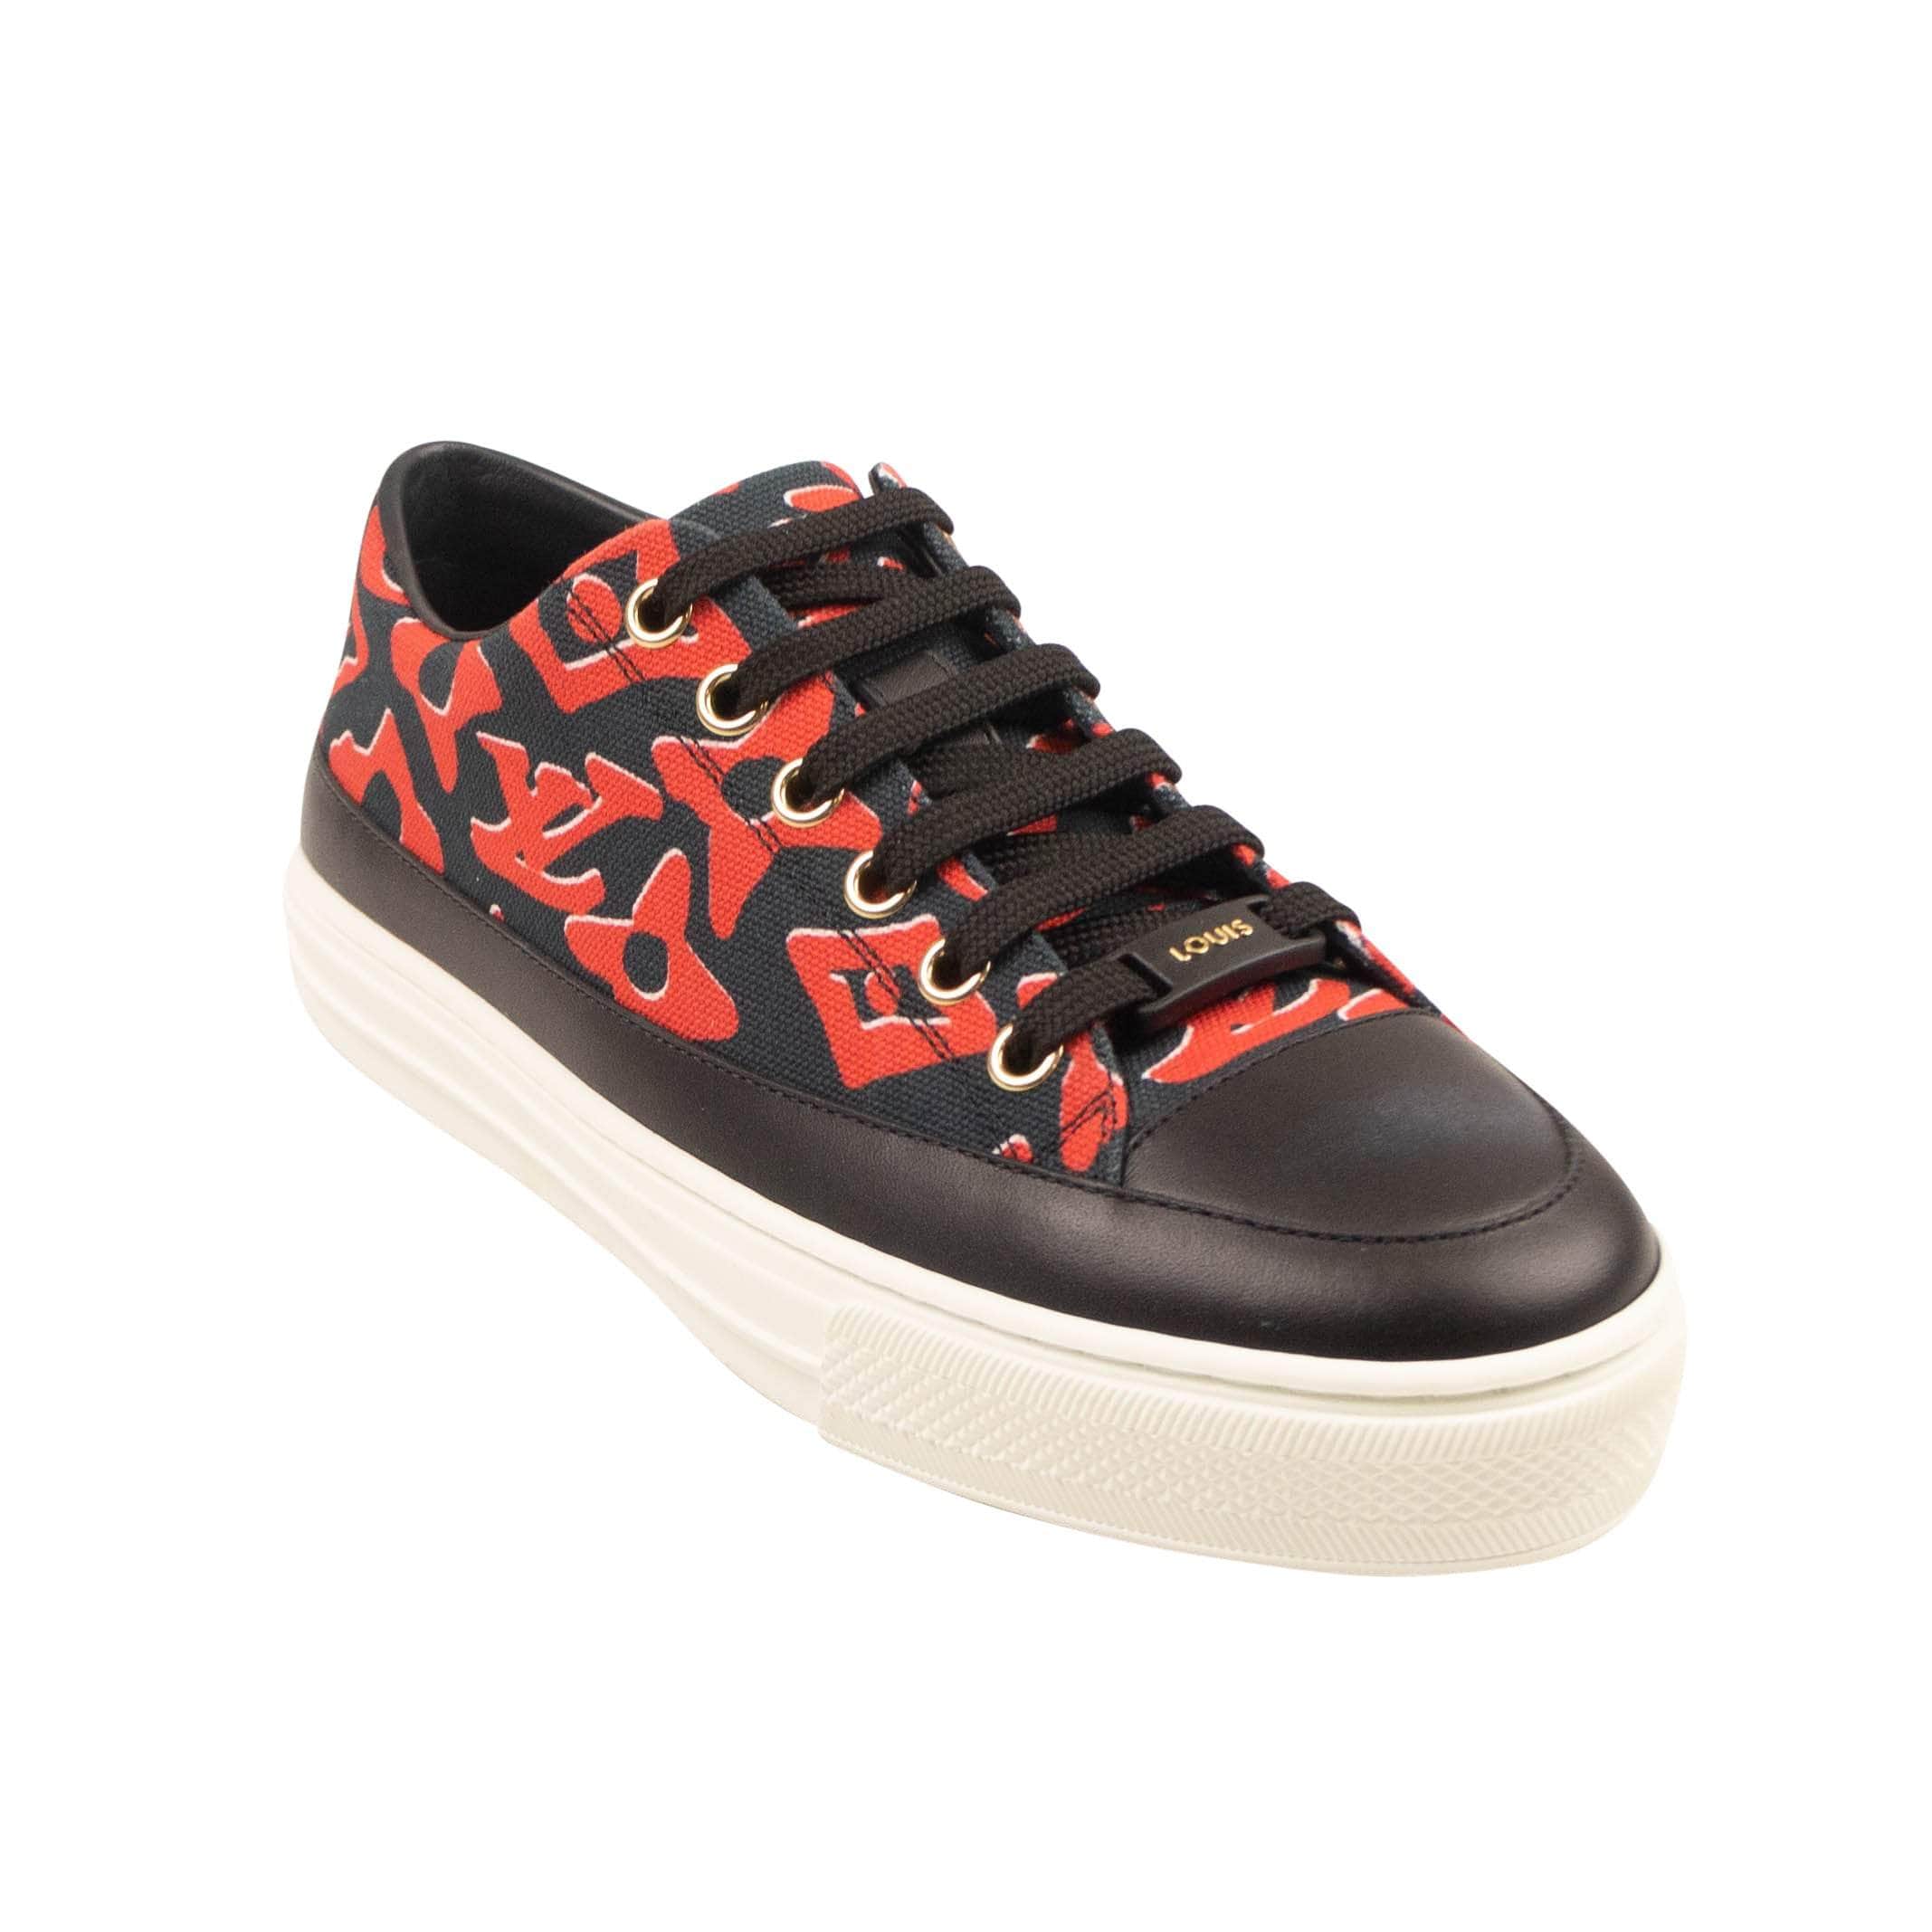 Louis Vuitton 250-500, channelenable-all, chicmi, couponcollection, gender-womens, main-shoes, size-34-5, SPO, stadiumgoods 34.5 Black And Red Stellar Low Top Sneakers 95-LVT-2085/34.5 95-LVT-2085/34.5